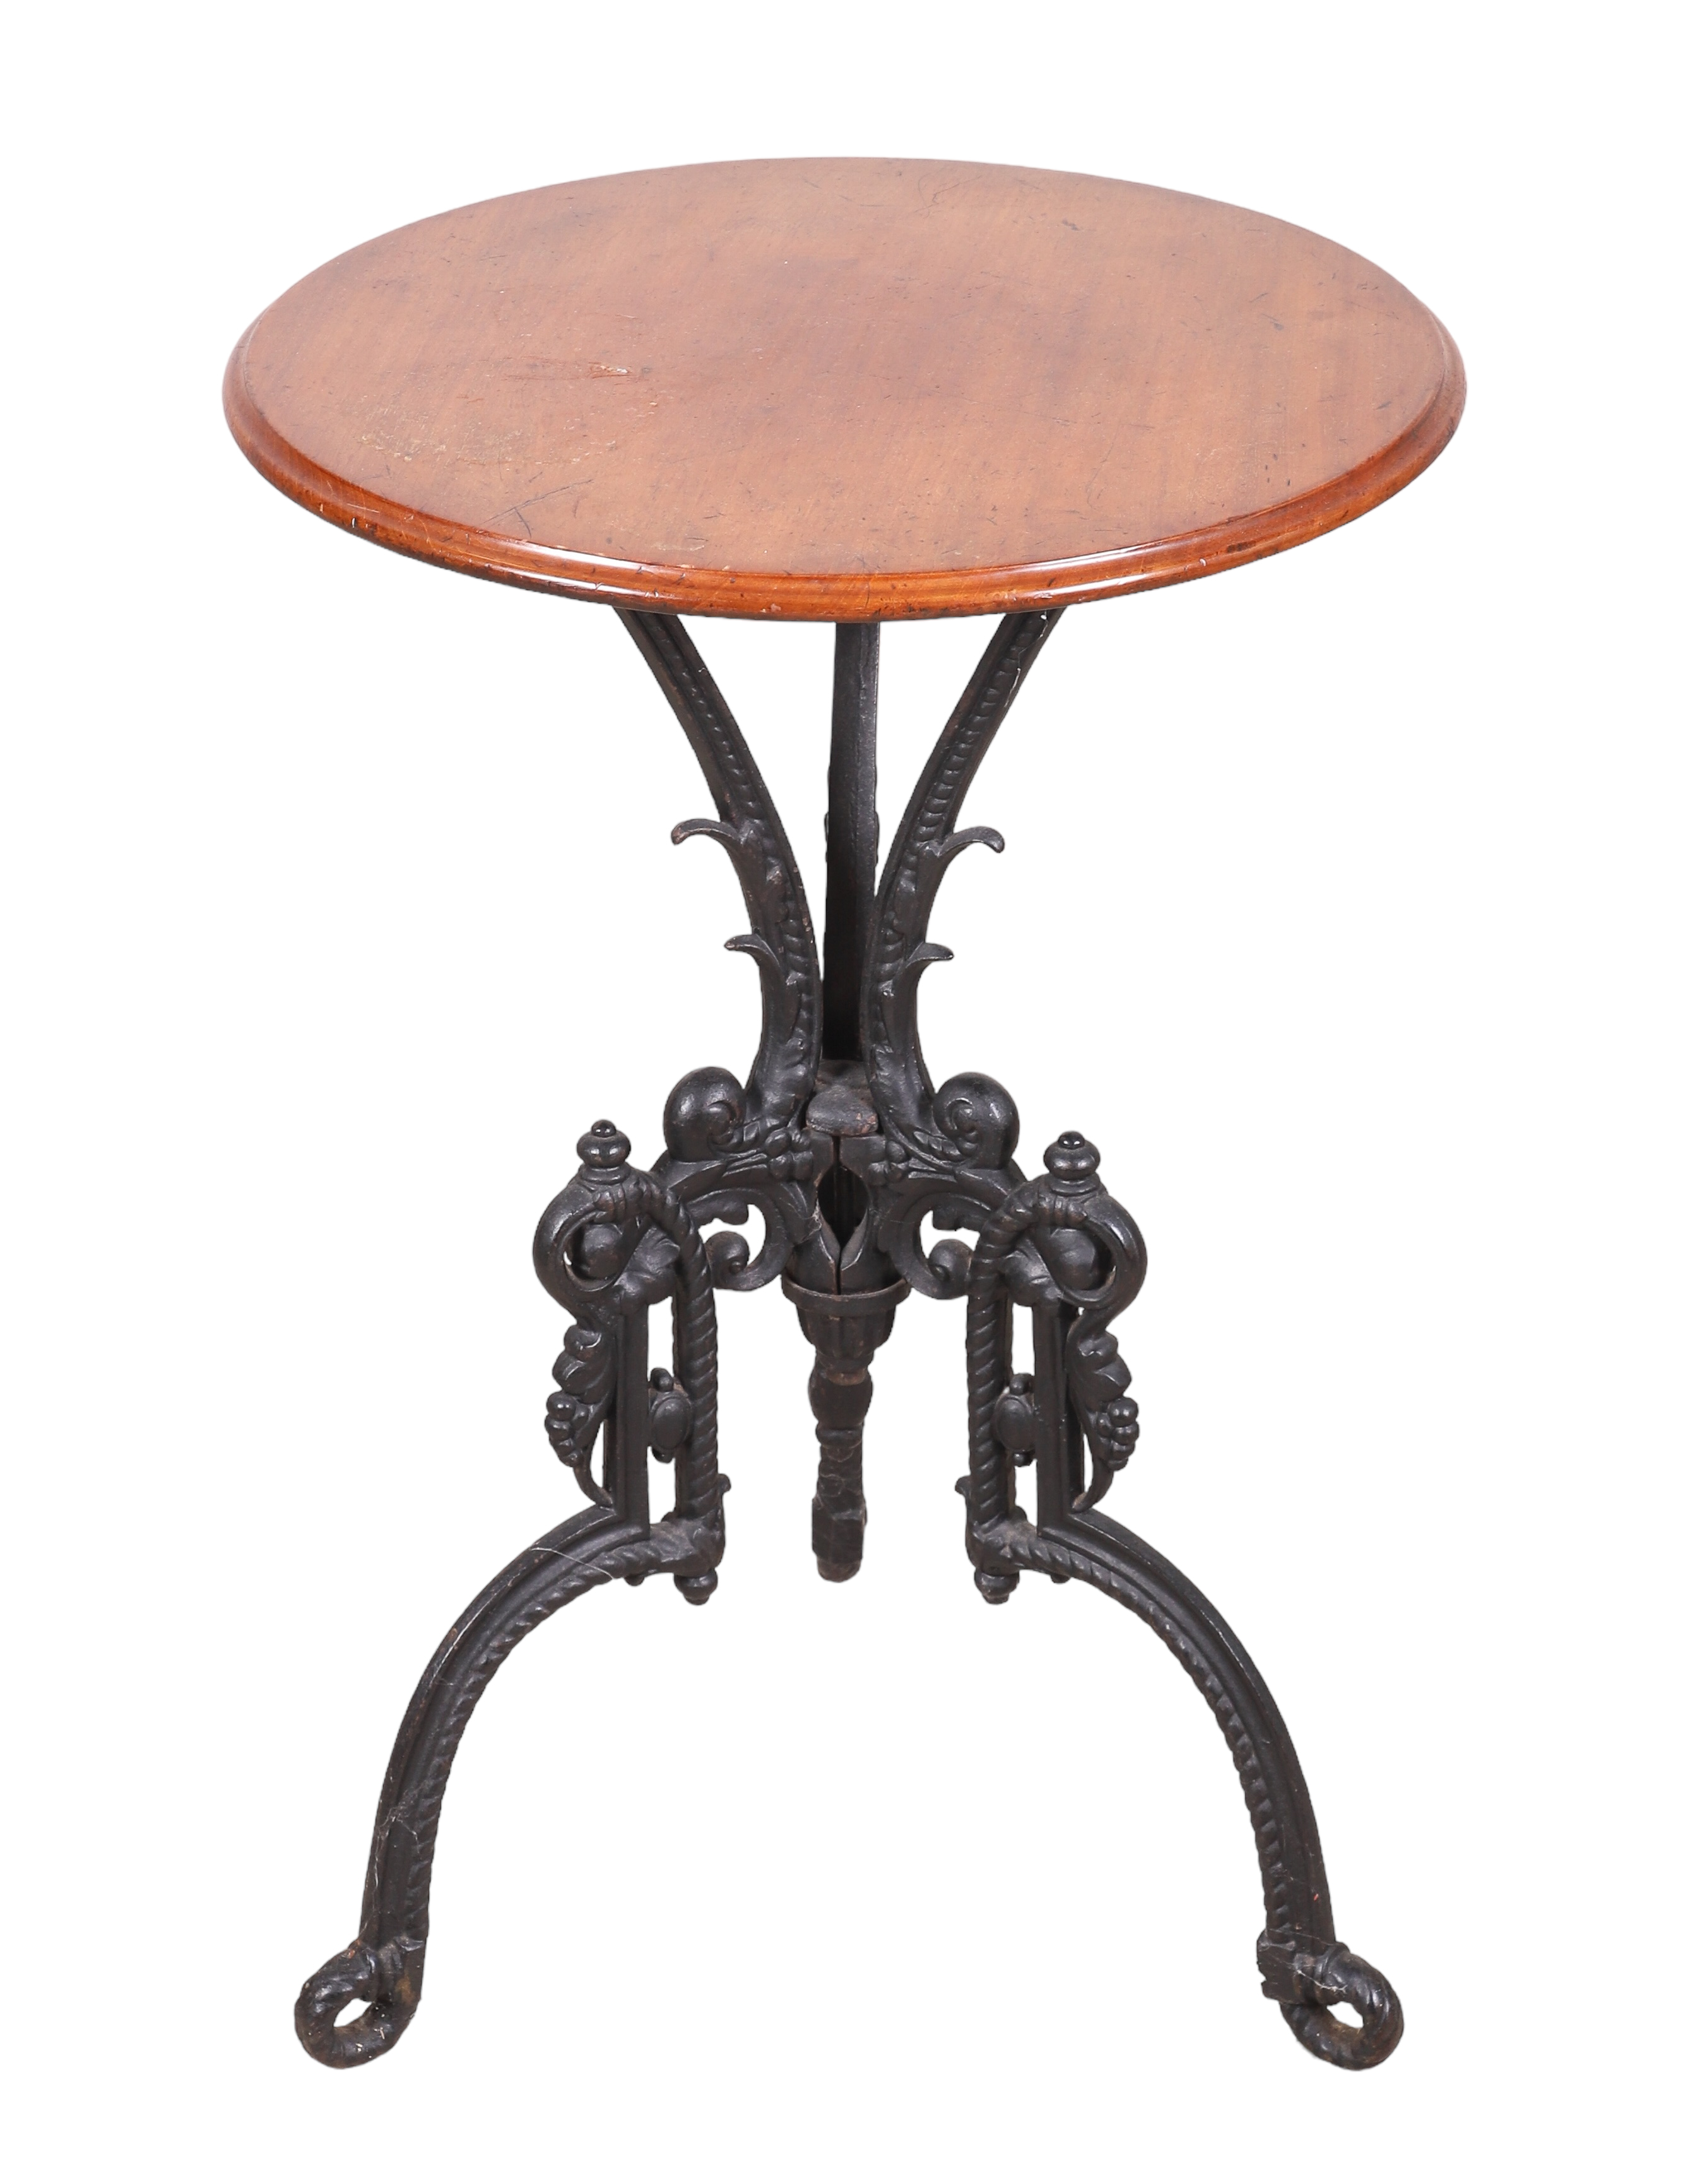 Cherry and iron side table, round